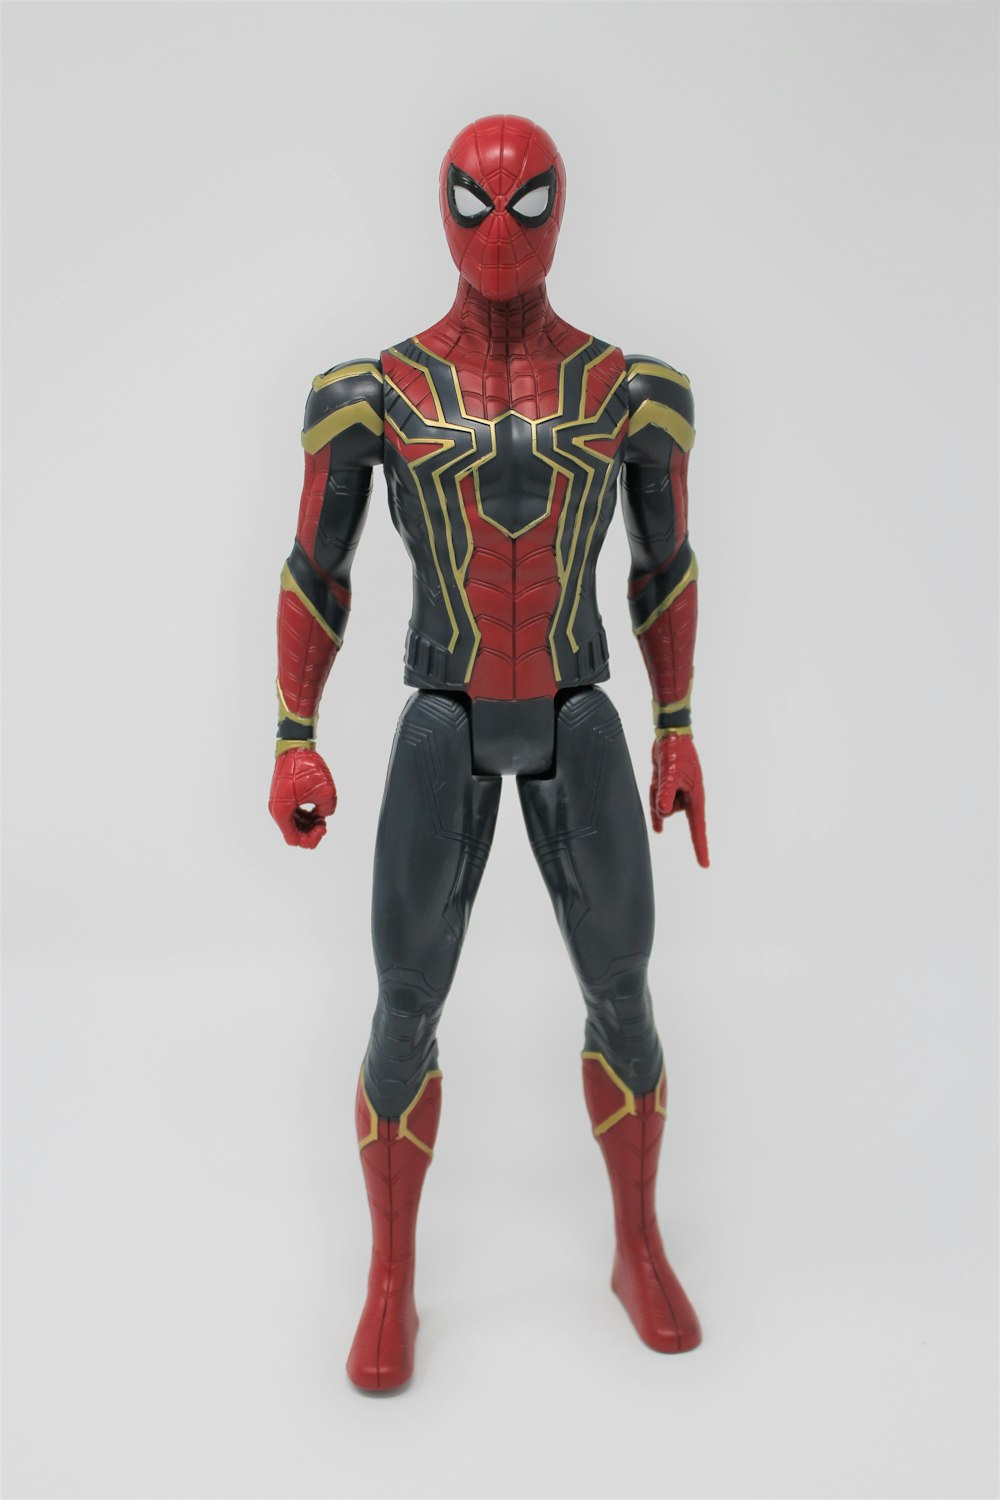 Marvel's Spider-man action figure in his Iron Spider suit